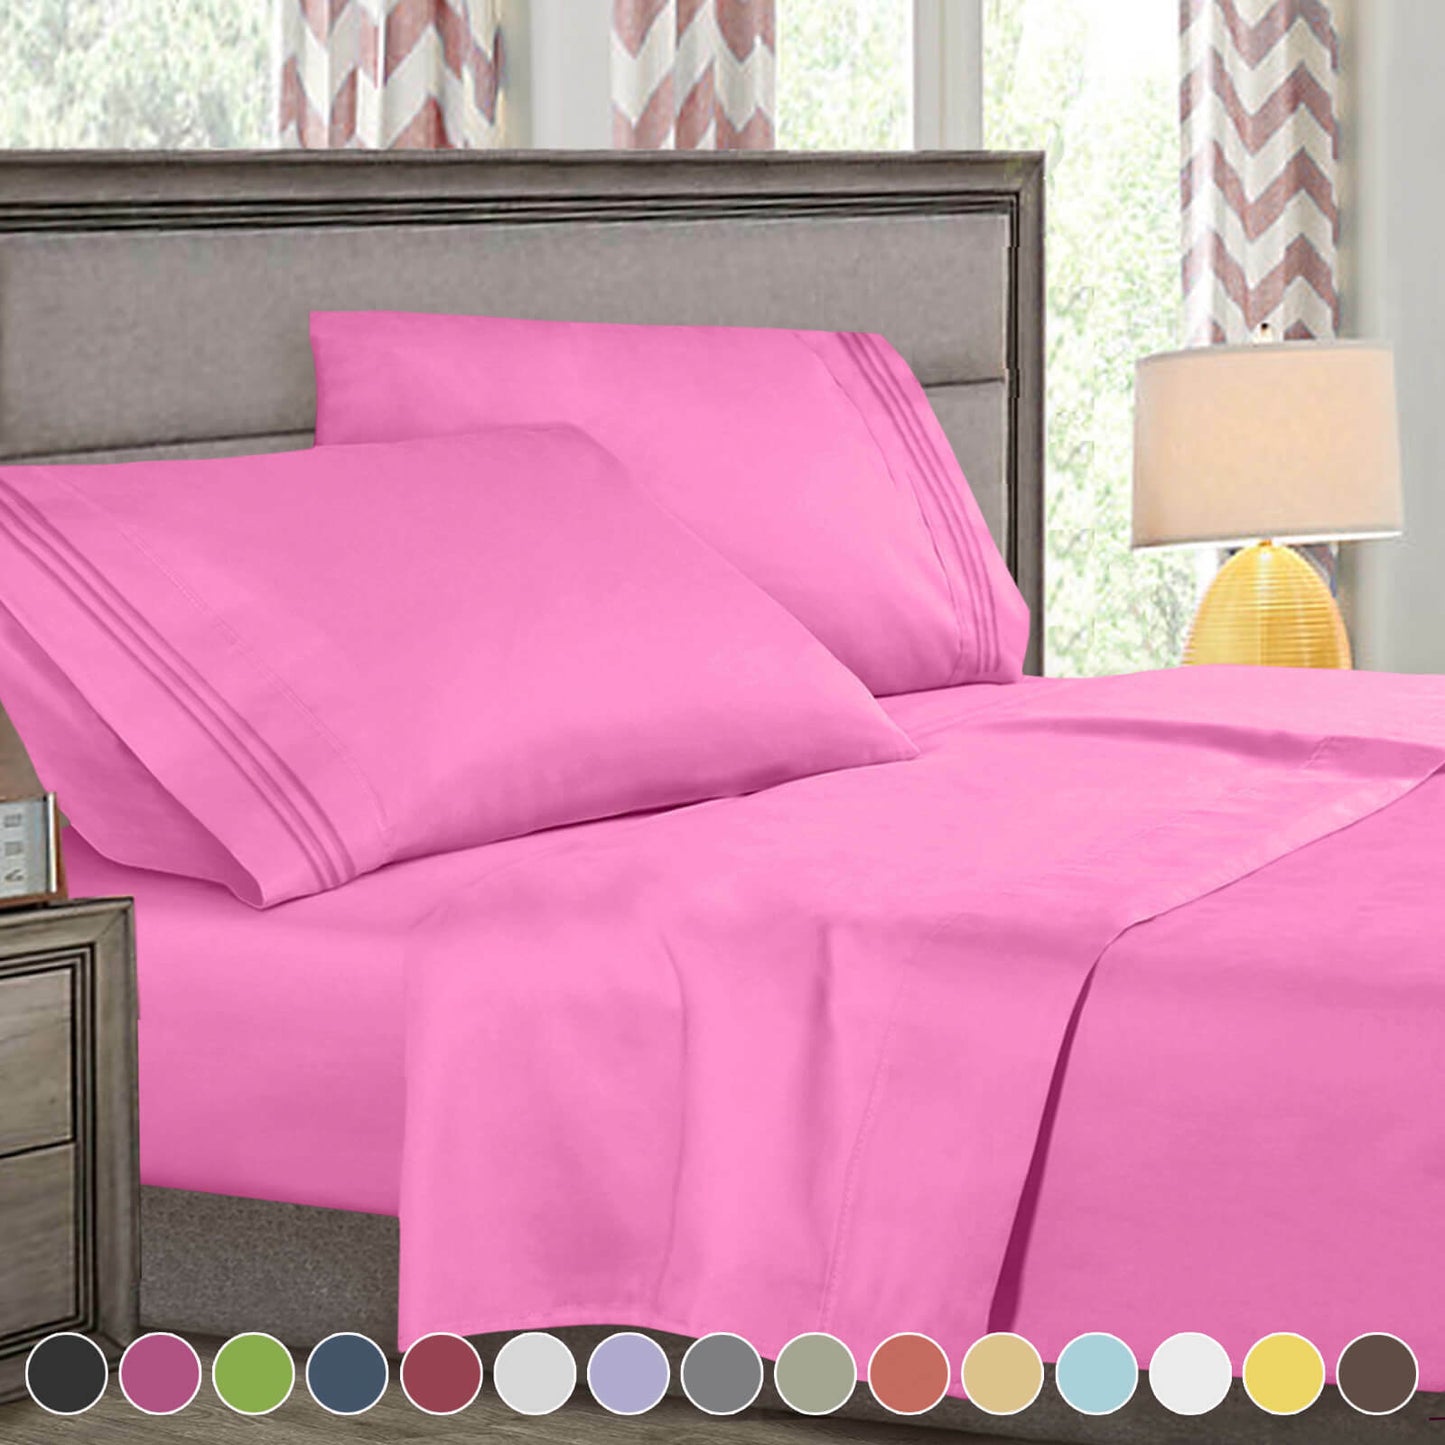 Bed Sheets - 4-Piece Deep Pocket Bed Sheet Set - 1800 Collection Hotel Quality - Queen / Pink